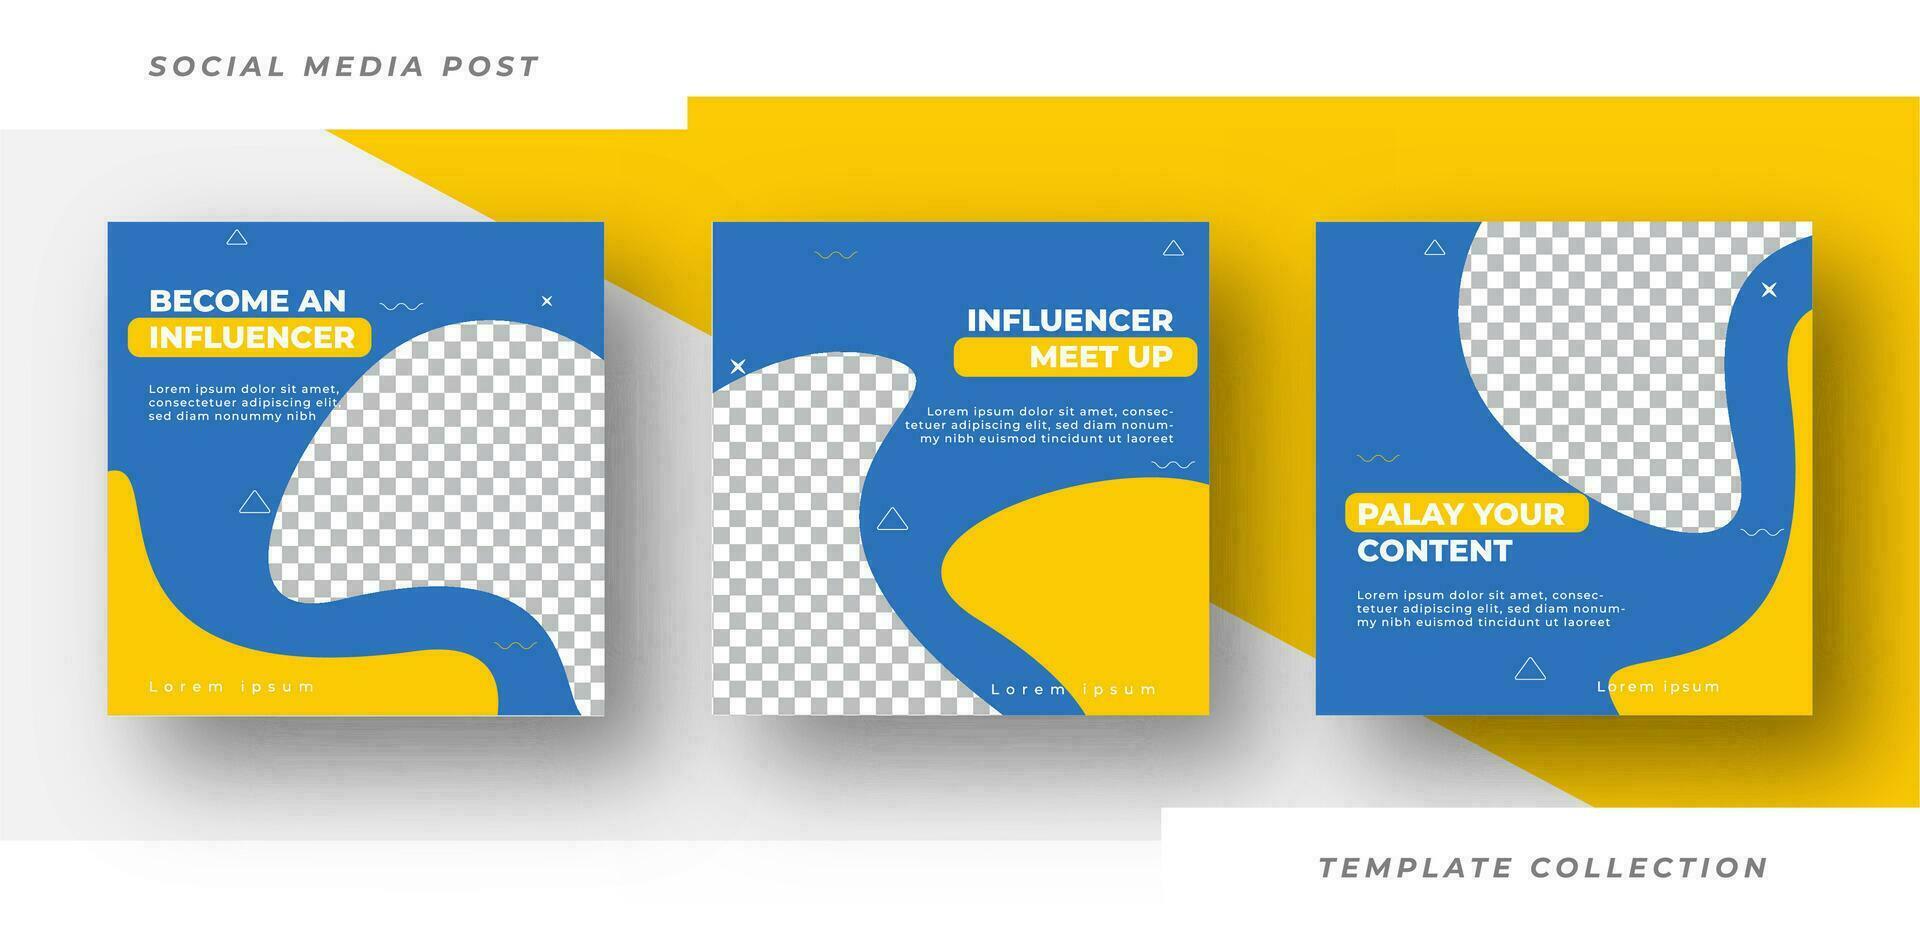 Influencer meet up Digital marketing and corporate social media post template, Pro Vector